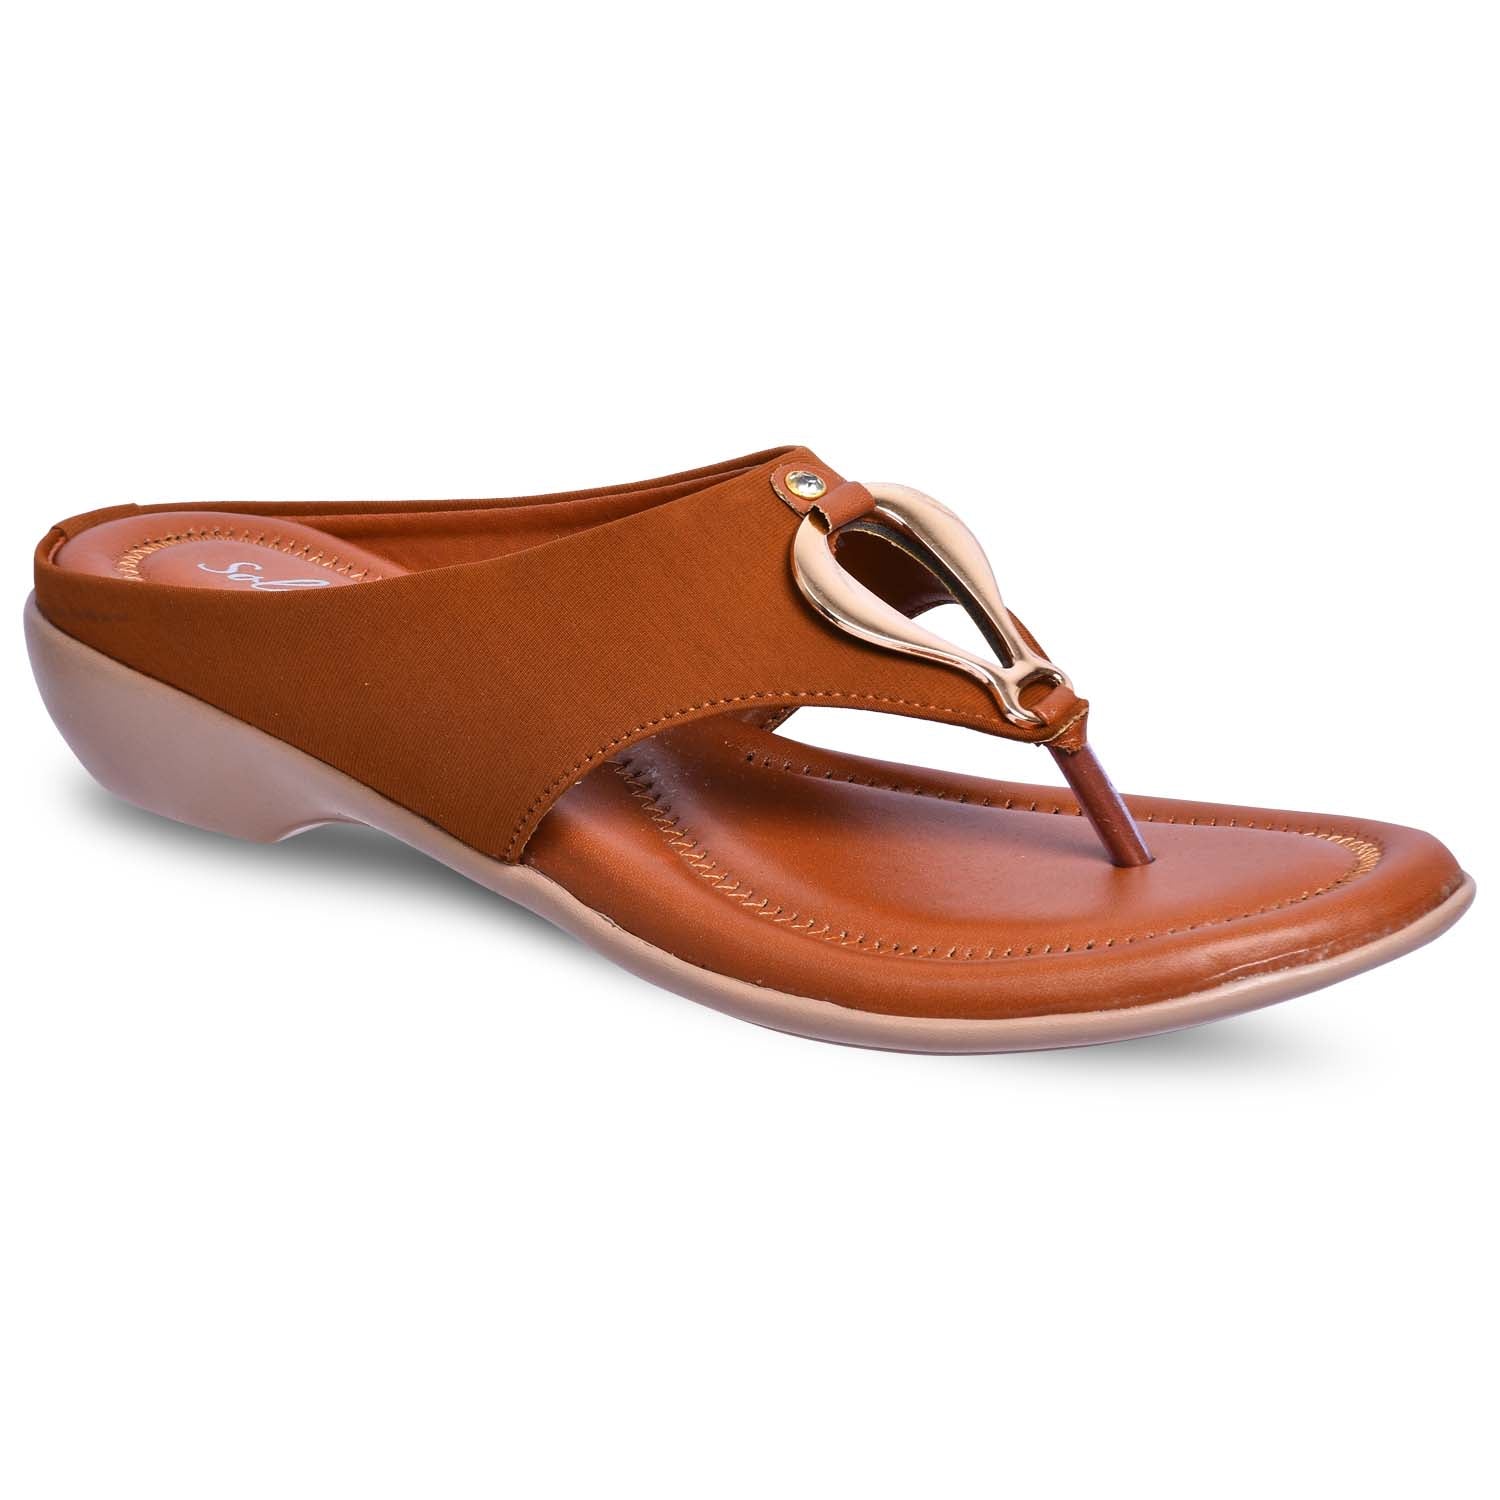 Paragon R1007L Women Sandals | Casual &amp; Formal Sandals | Stylish, Comfortable &amp; Durable | For Daily &amp; Occasion Wear